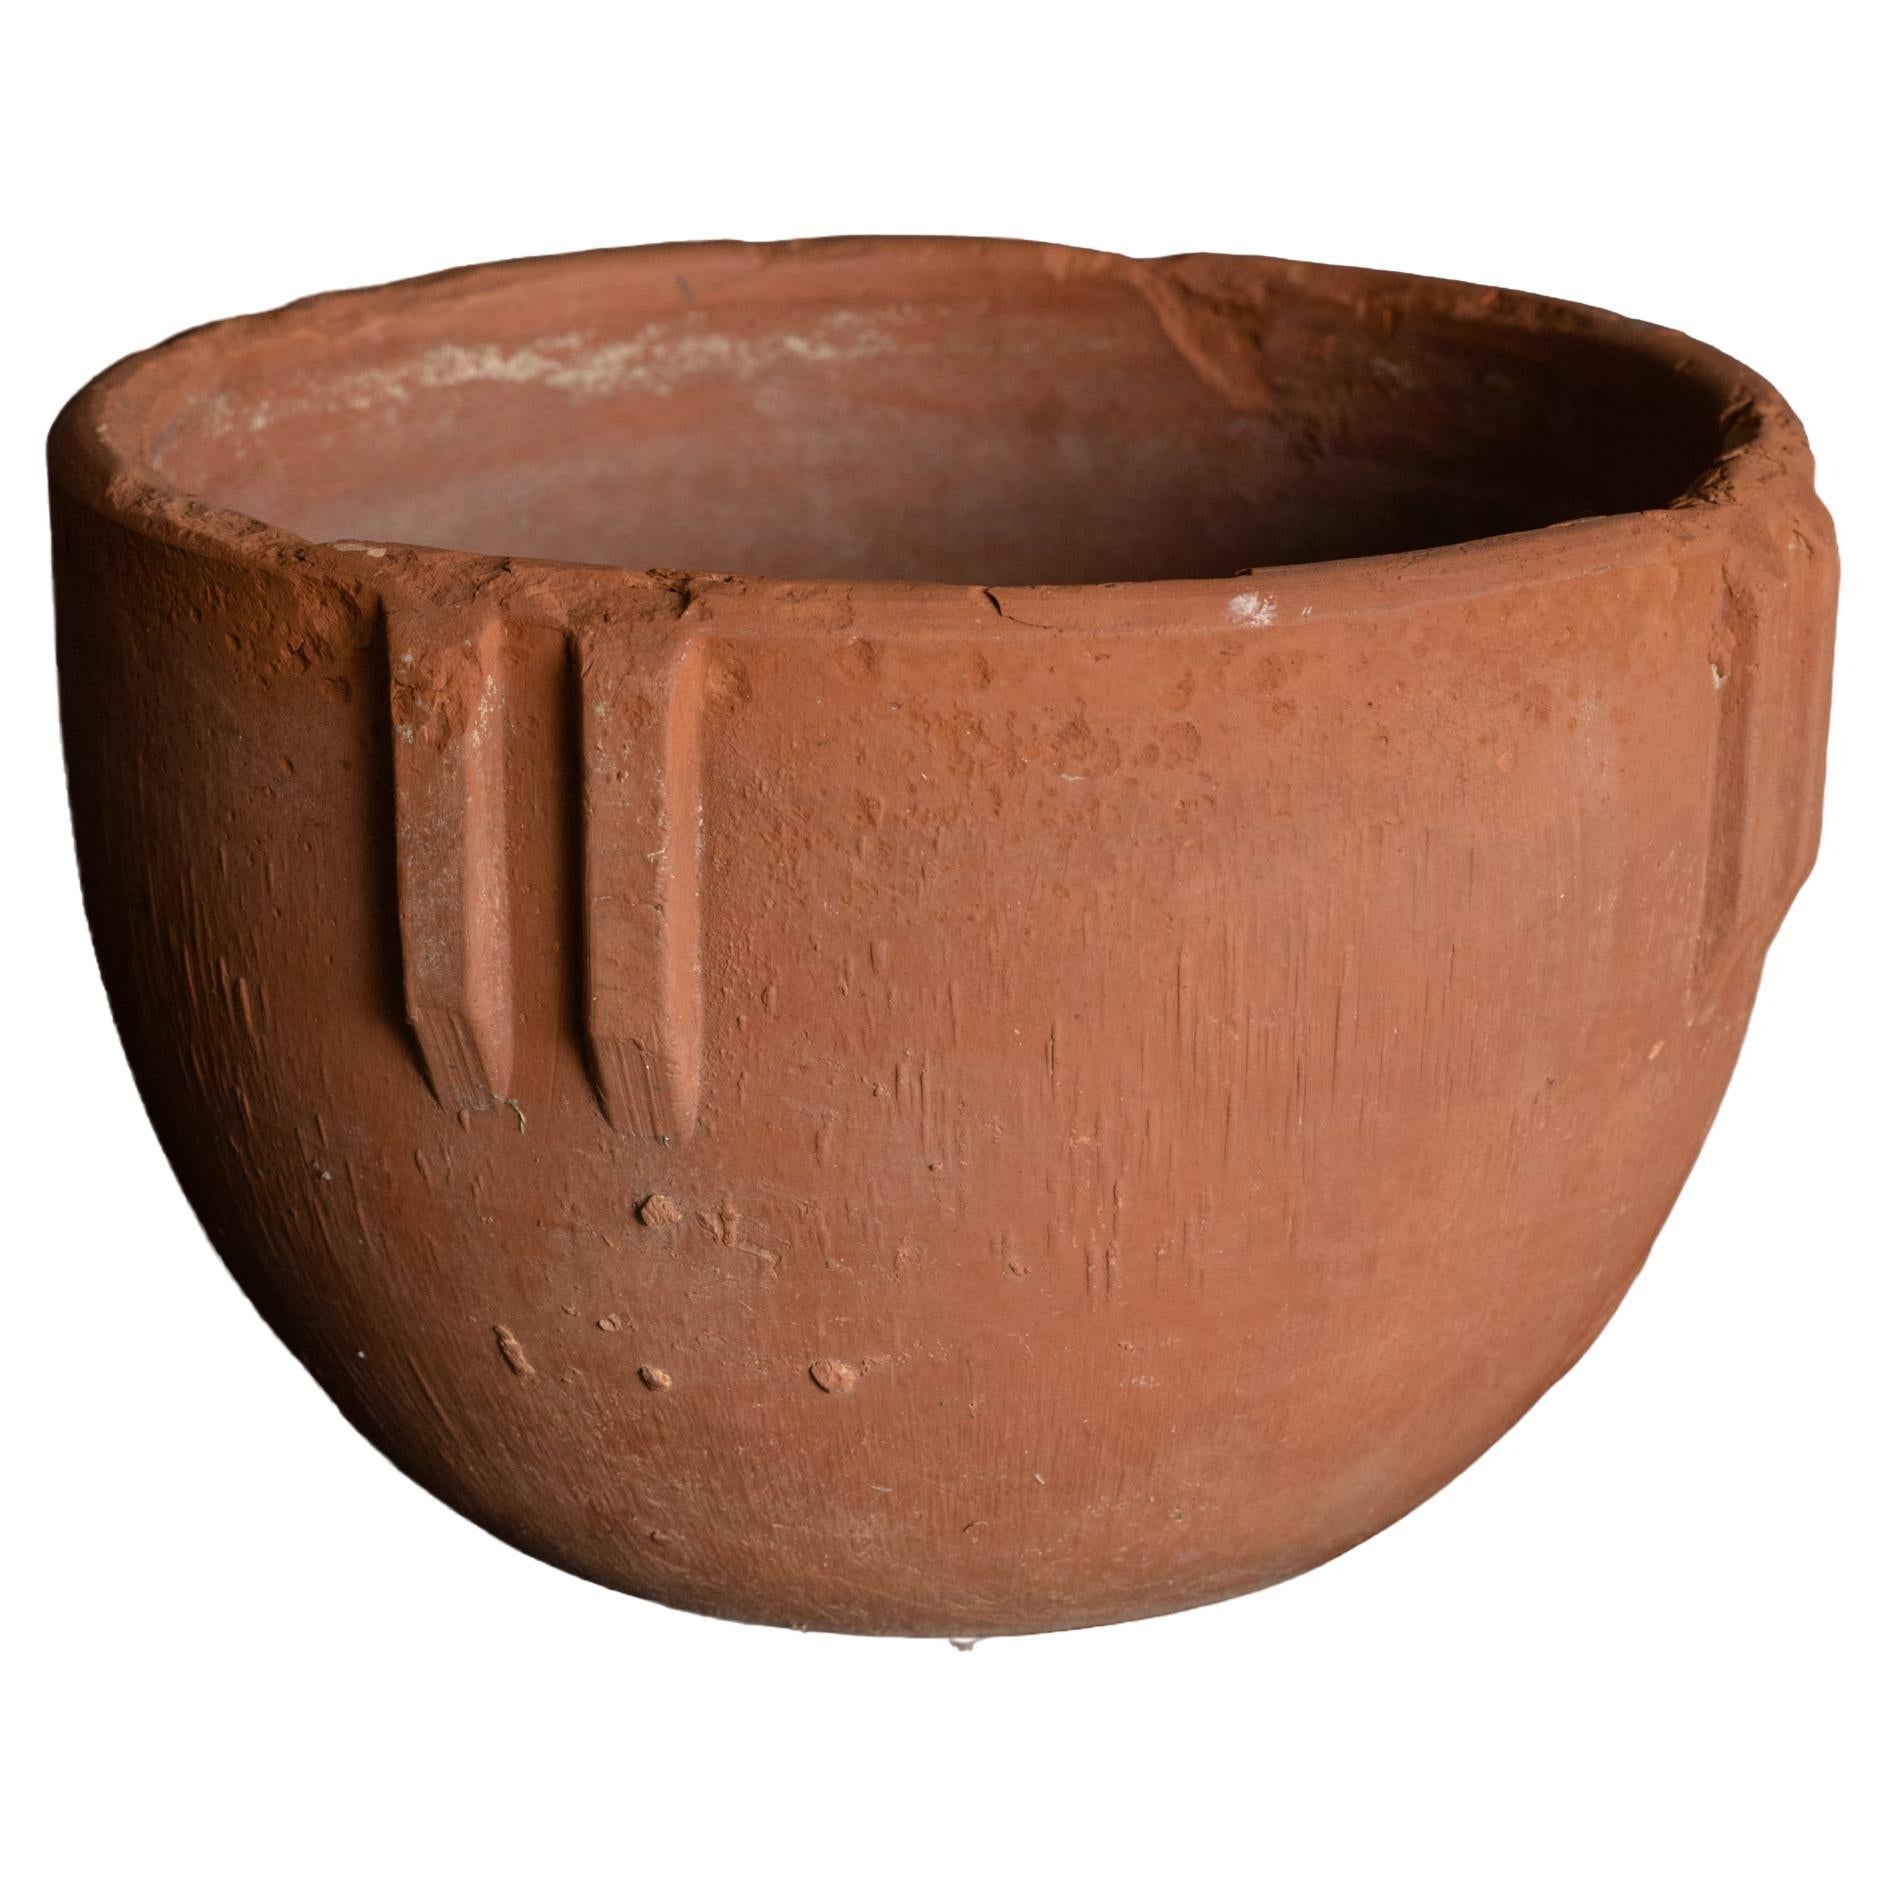 Terracotta "Indian Pot" by Bauer Pottery